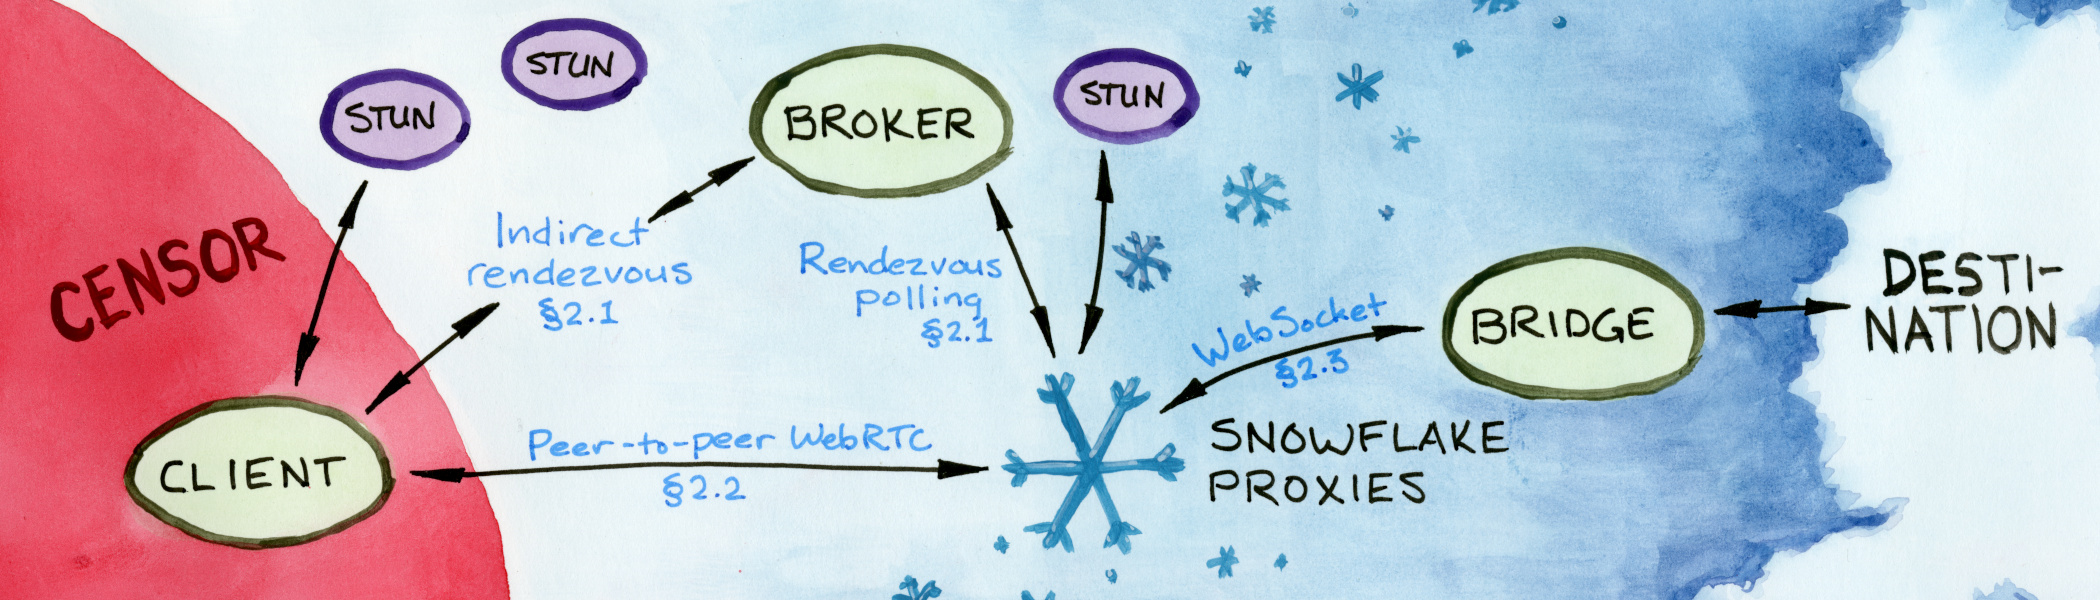 
A painted diagram showing the components of Snowflake.
It progresses from the “Censor” on the left (in red) to the “Destination” on the right (depicted as a white cloud).
The “Client” (inside the censor), “Broker”, and “Bridge” are green ovals.
Three smaller “STUN” servers are smaller purple ovals.
The “Snowflake Proxies” are drawn as snowflakes, with one of them being larger to serve as a representative.
There are double-headed arrows between the client and a STUN server,
between the client and the broker (through “Indirect rendezvous §2.1”),
between the snowflake proxy and a STUN server,
between the snowflake proxy and the broker (labeled “Rendezvous polling §2.1”),
between the client and the snowflake proxy (labeled “Peer-to-peer WebRTC §2.2”),
between the snowflake proxy and the bridge (labeled “WebSocket §2.3”),
and between the bridge and the destination.
